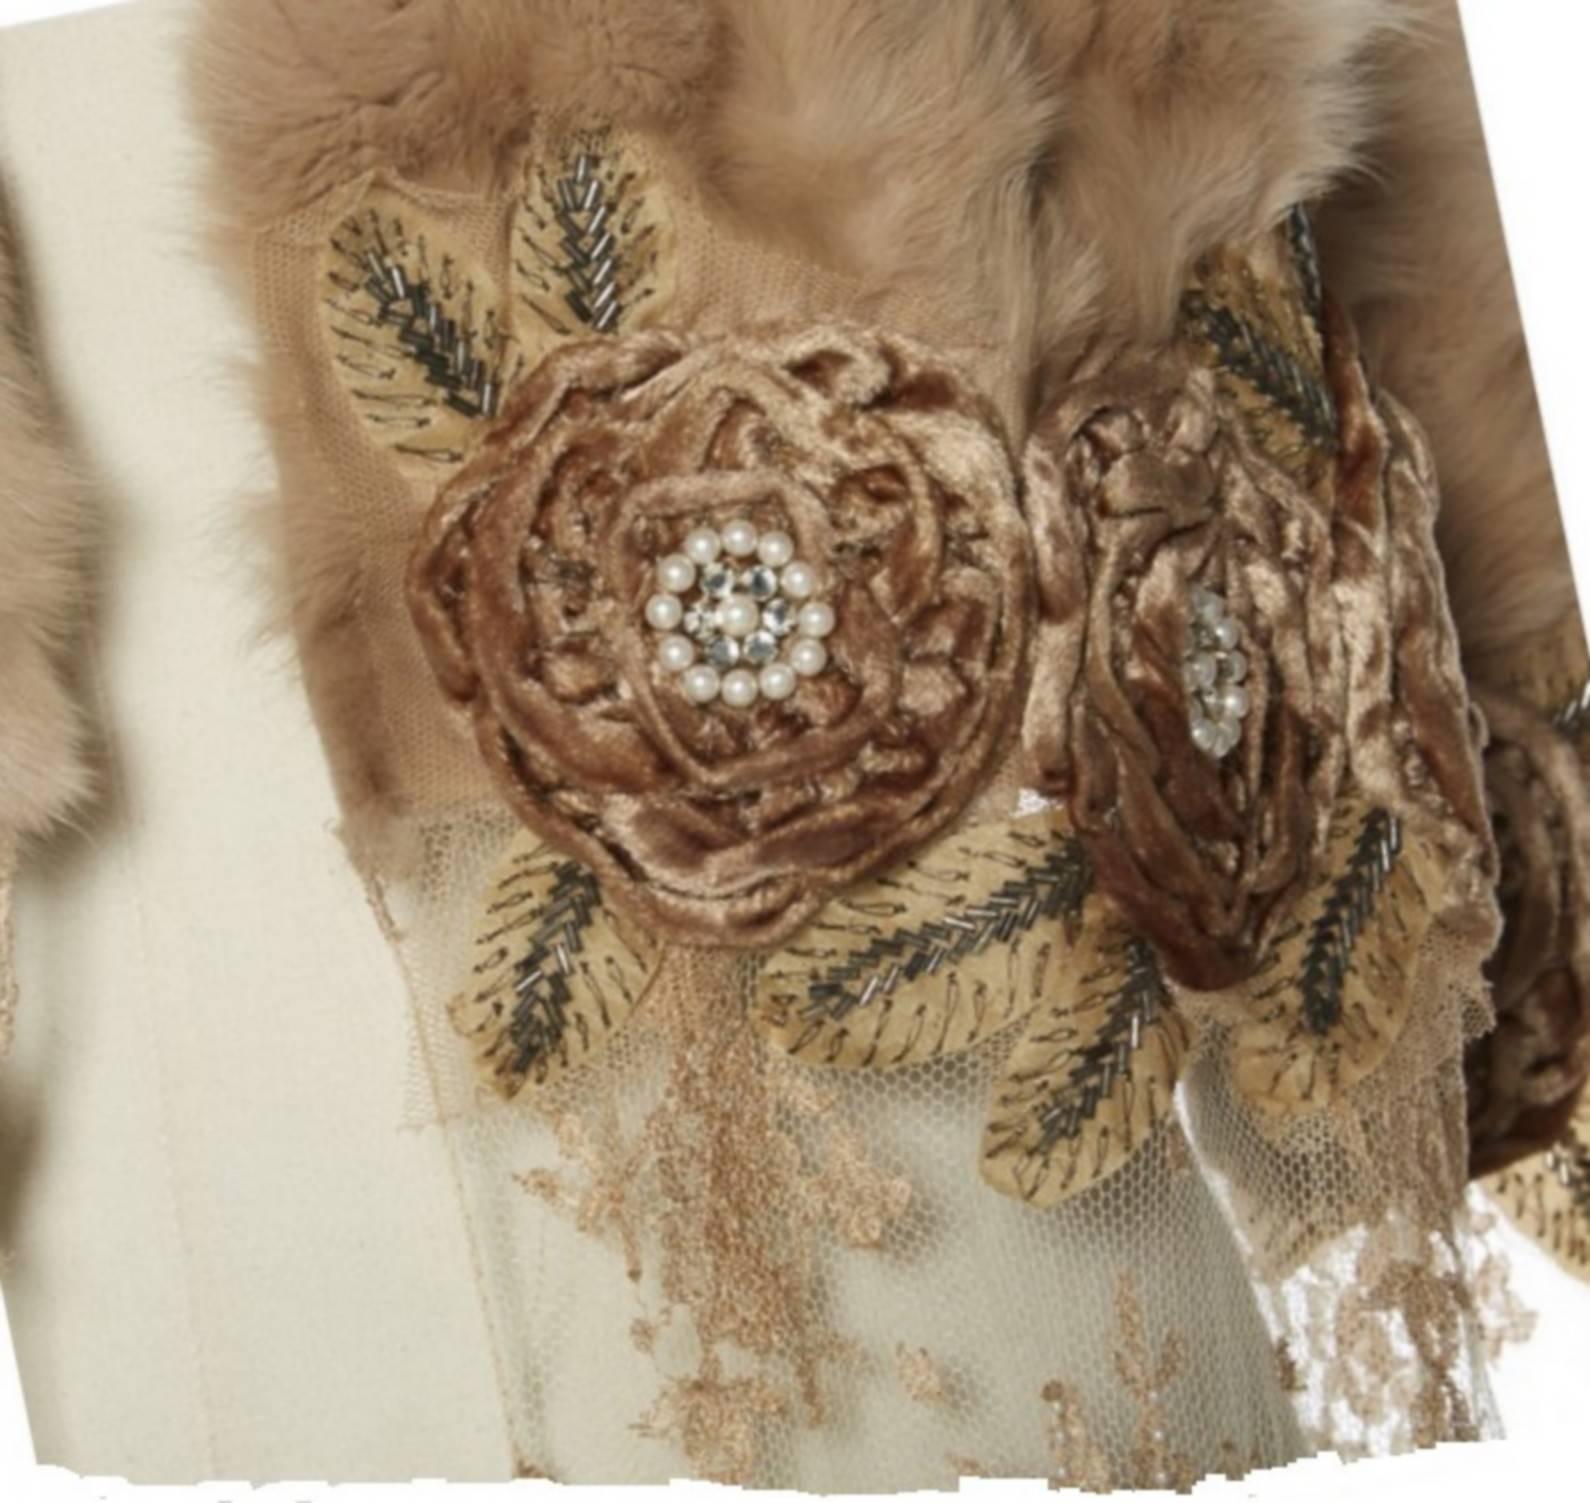 STUNNING Long Scarf Valentino Couture
Limited edition sold out in few days. It could be used as an evening shawl or as gorgeous Bridal shawl with simple dress
Stole in rabbit fur beige and embroidered flowers tones on tone, beads and rhinestones,